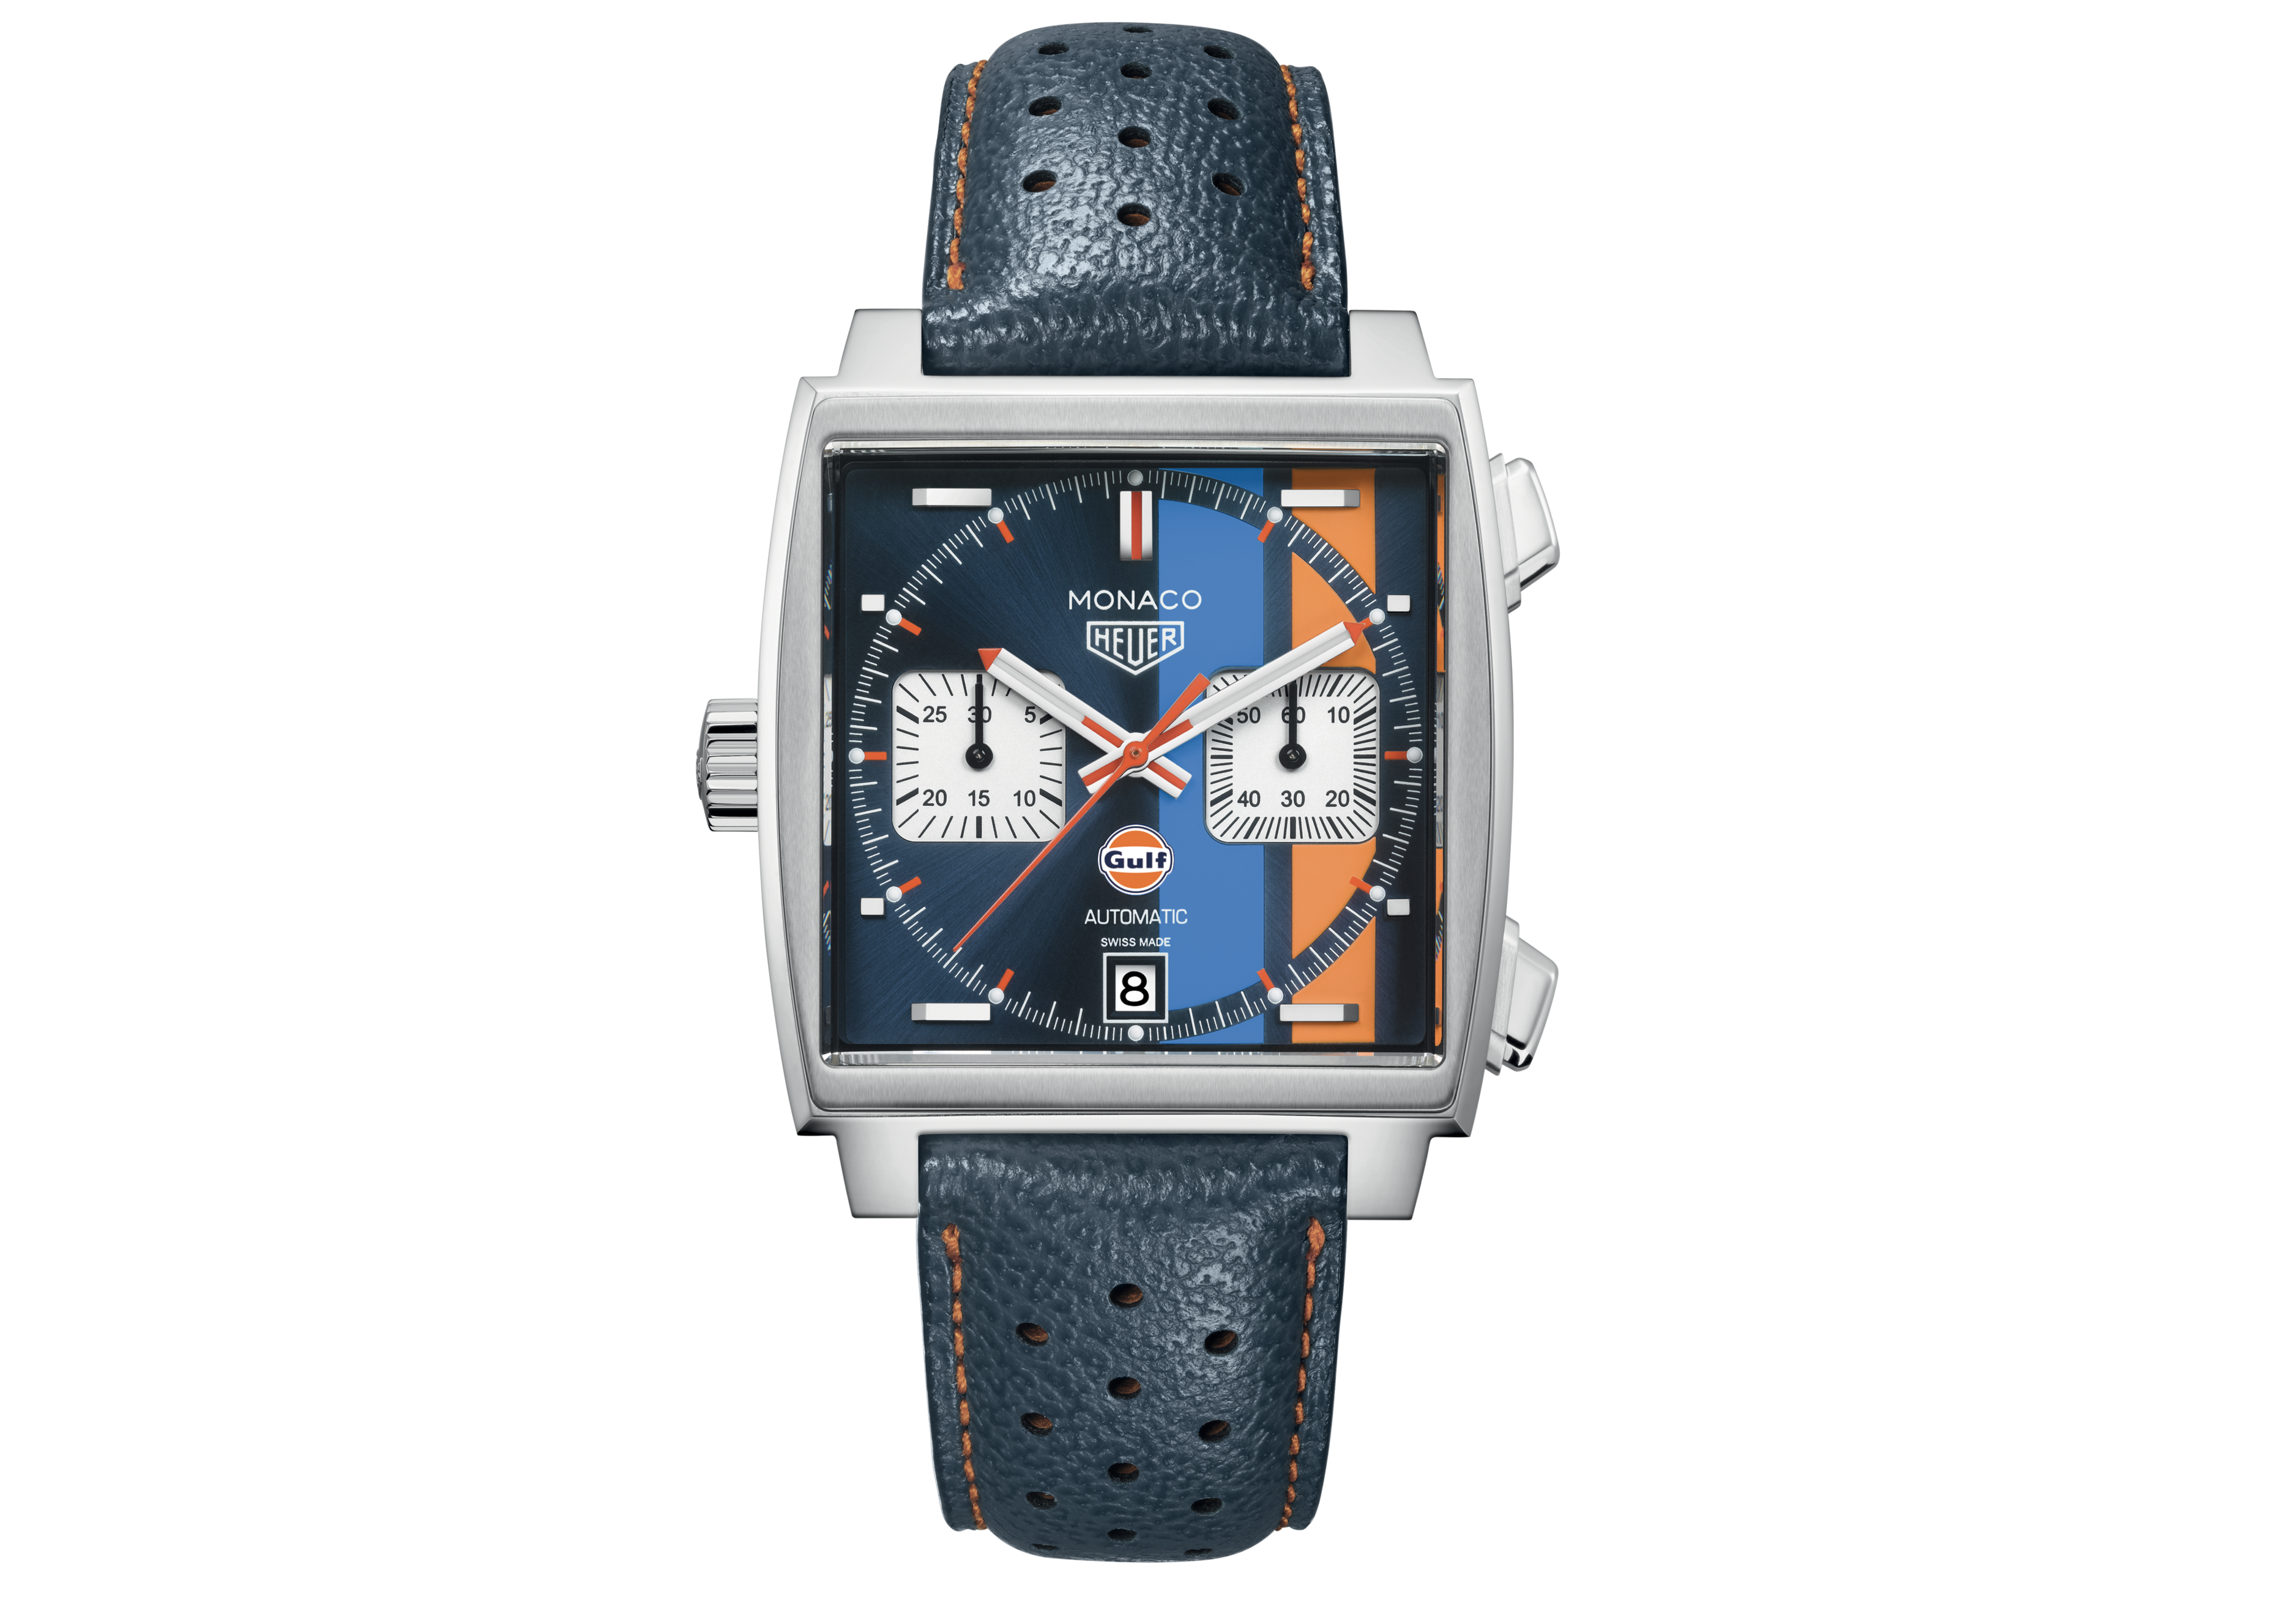 Square Gulf Miyota Quartz Chronograph Mens Watch Steel Case Blue Orange  Dial White Subdial Stick Markers Leather Strap Stopwatch Watches Puretime01  Z35a1 From Puretime01, $19.07 | DHgate.Com